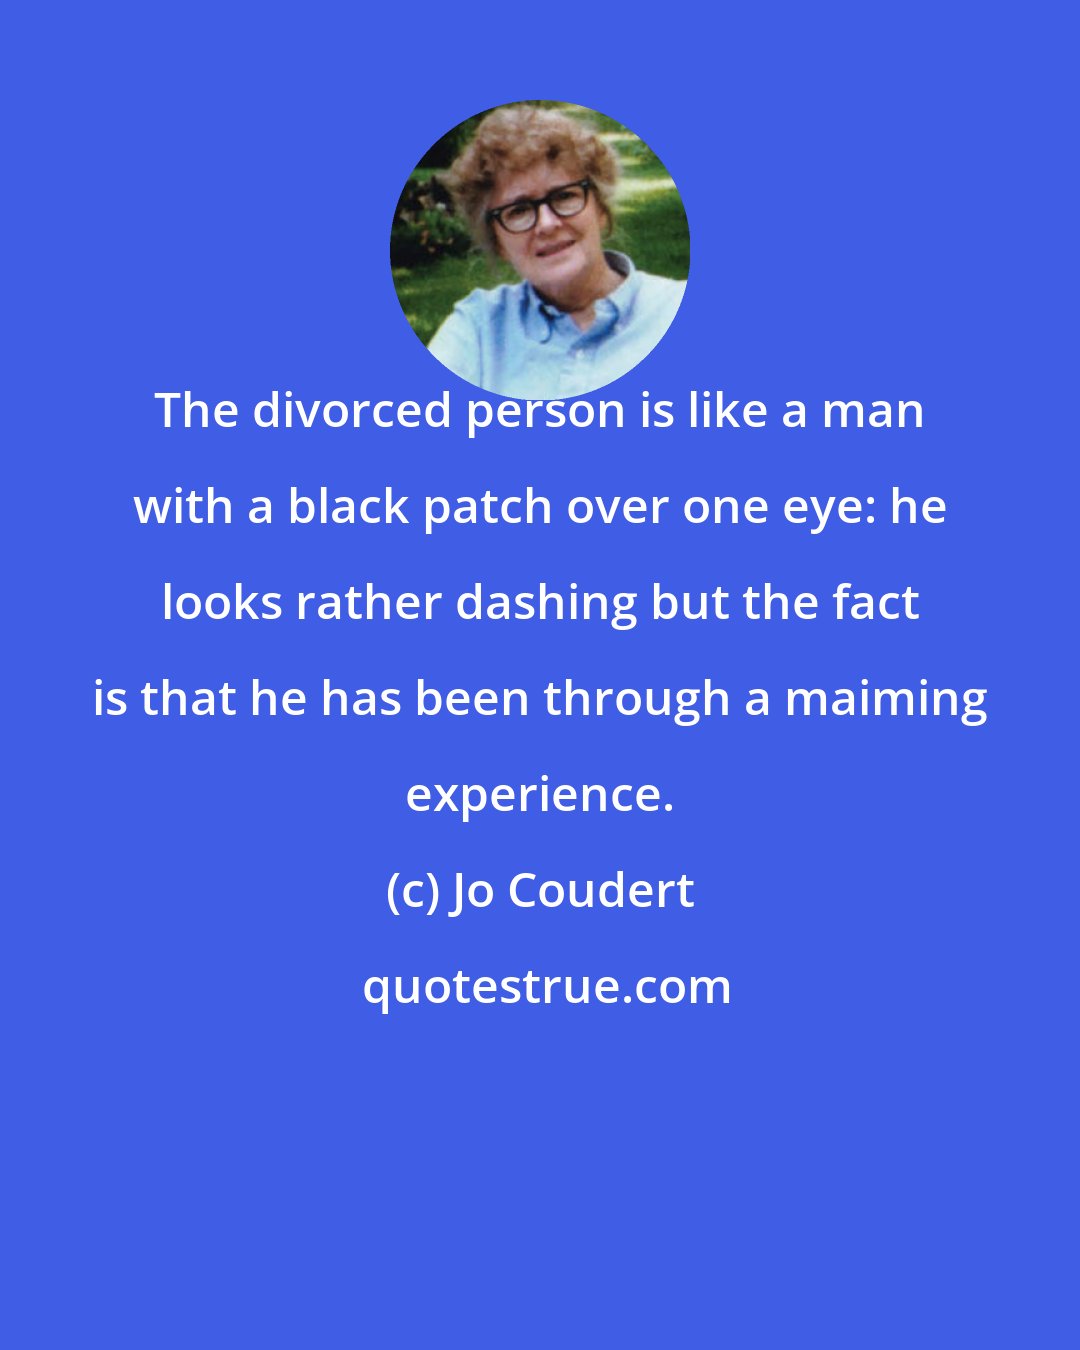 Jo Coudert: The divorced person is like a man with a black patch over one eye: he looks rather dashing but the fact is that he has been through a maiming experience.